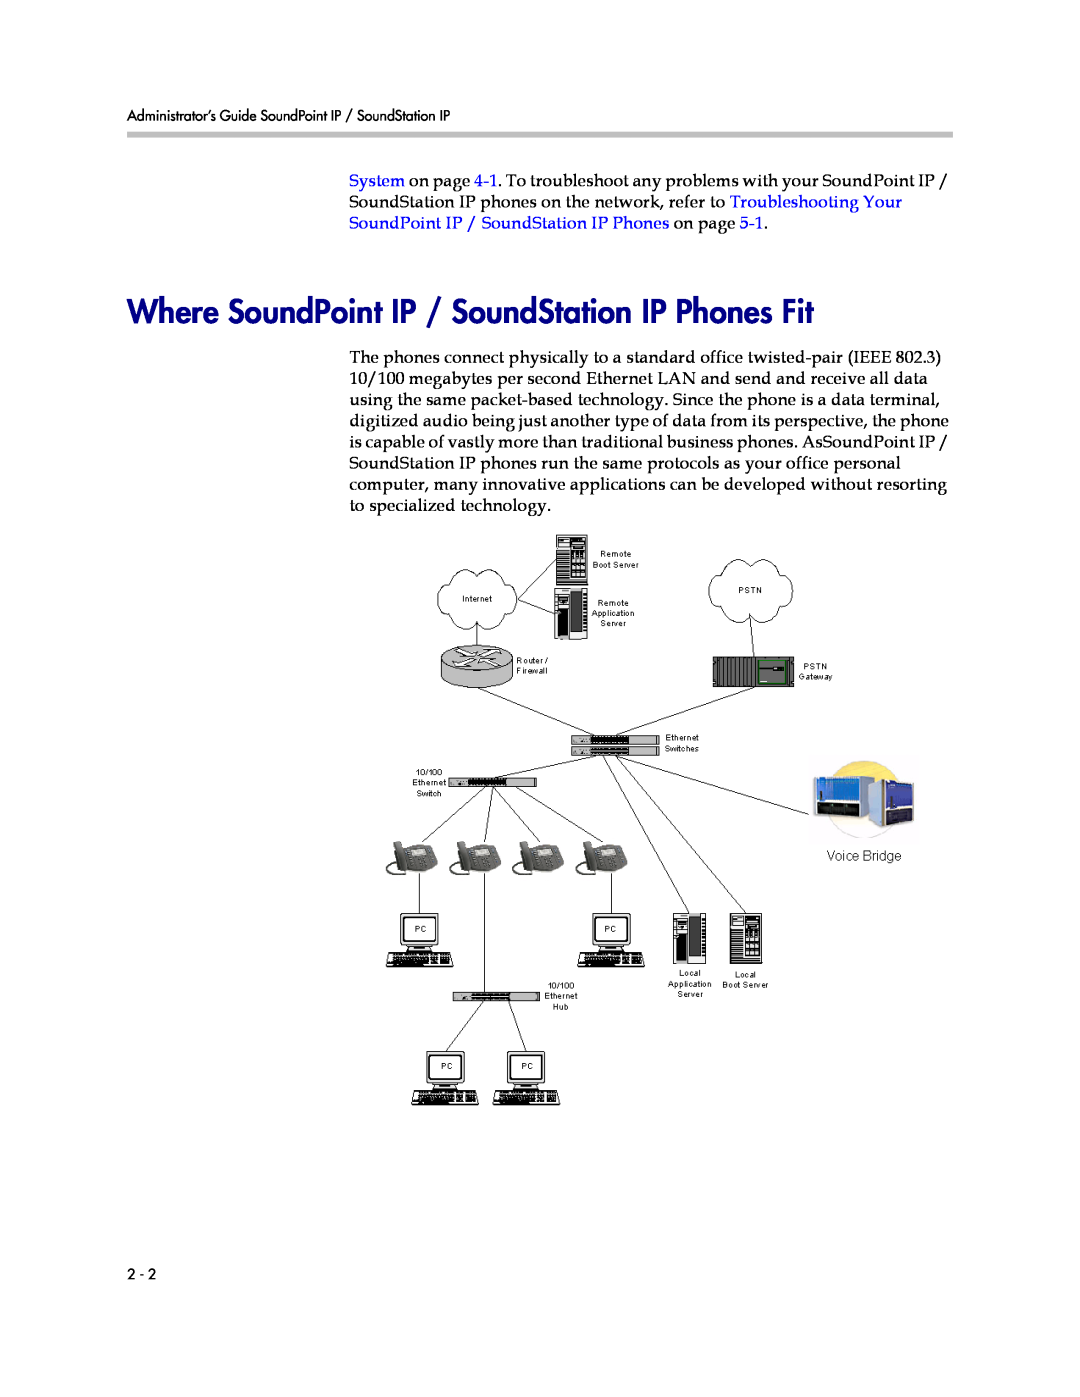 Polycom SIP 3.1 manual Where SoundPoint IP / SoundStation IP Phones Fit, SoundPoint IP / SoundStation IP Phones on page 